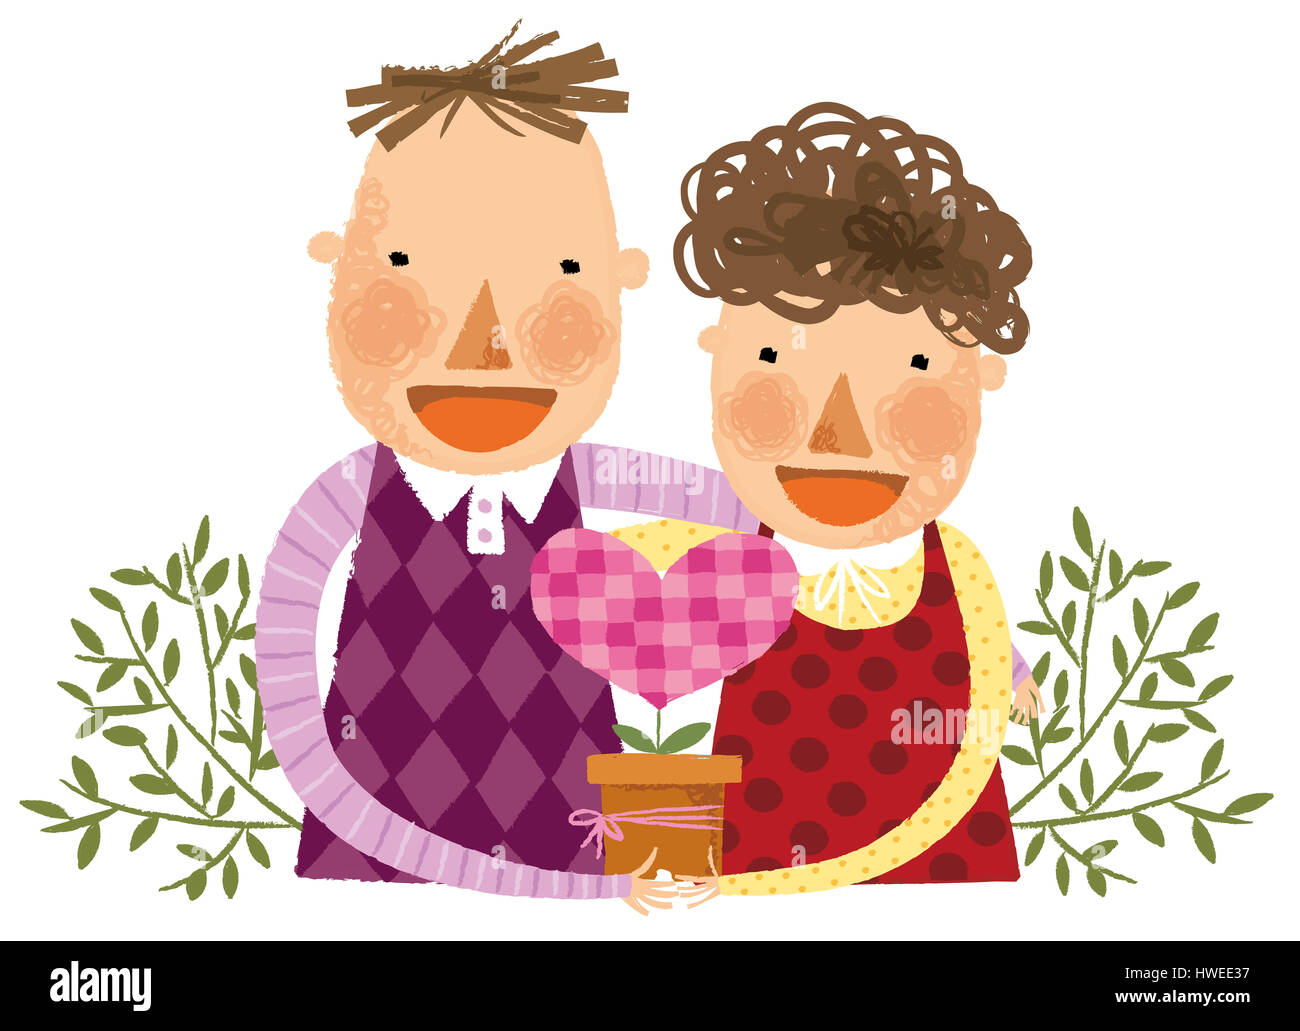 husband,wife,man,woman,male,female,lady,young man,young woman,together,togetherness,love,care,heart shape,flower,heart shape flower,valentine,couple,portrait,front view,leaves,white background,bond,abstract,adult,animation,art,artwork,bonding,cartoon,cgi,child,childhood,clip art,colourful,colour image,computer Stock Photo